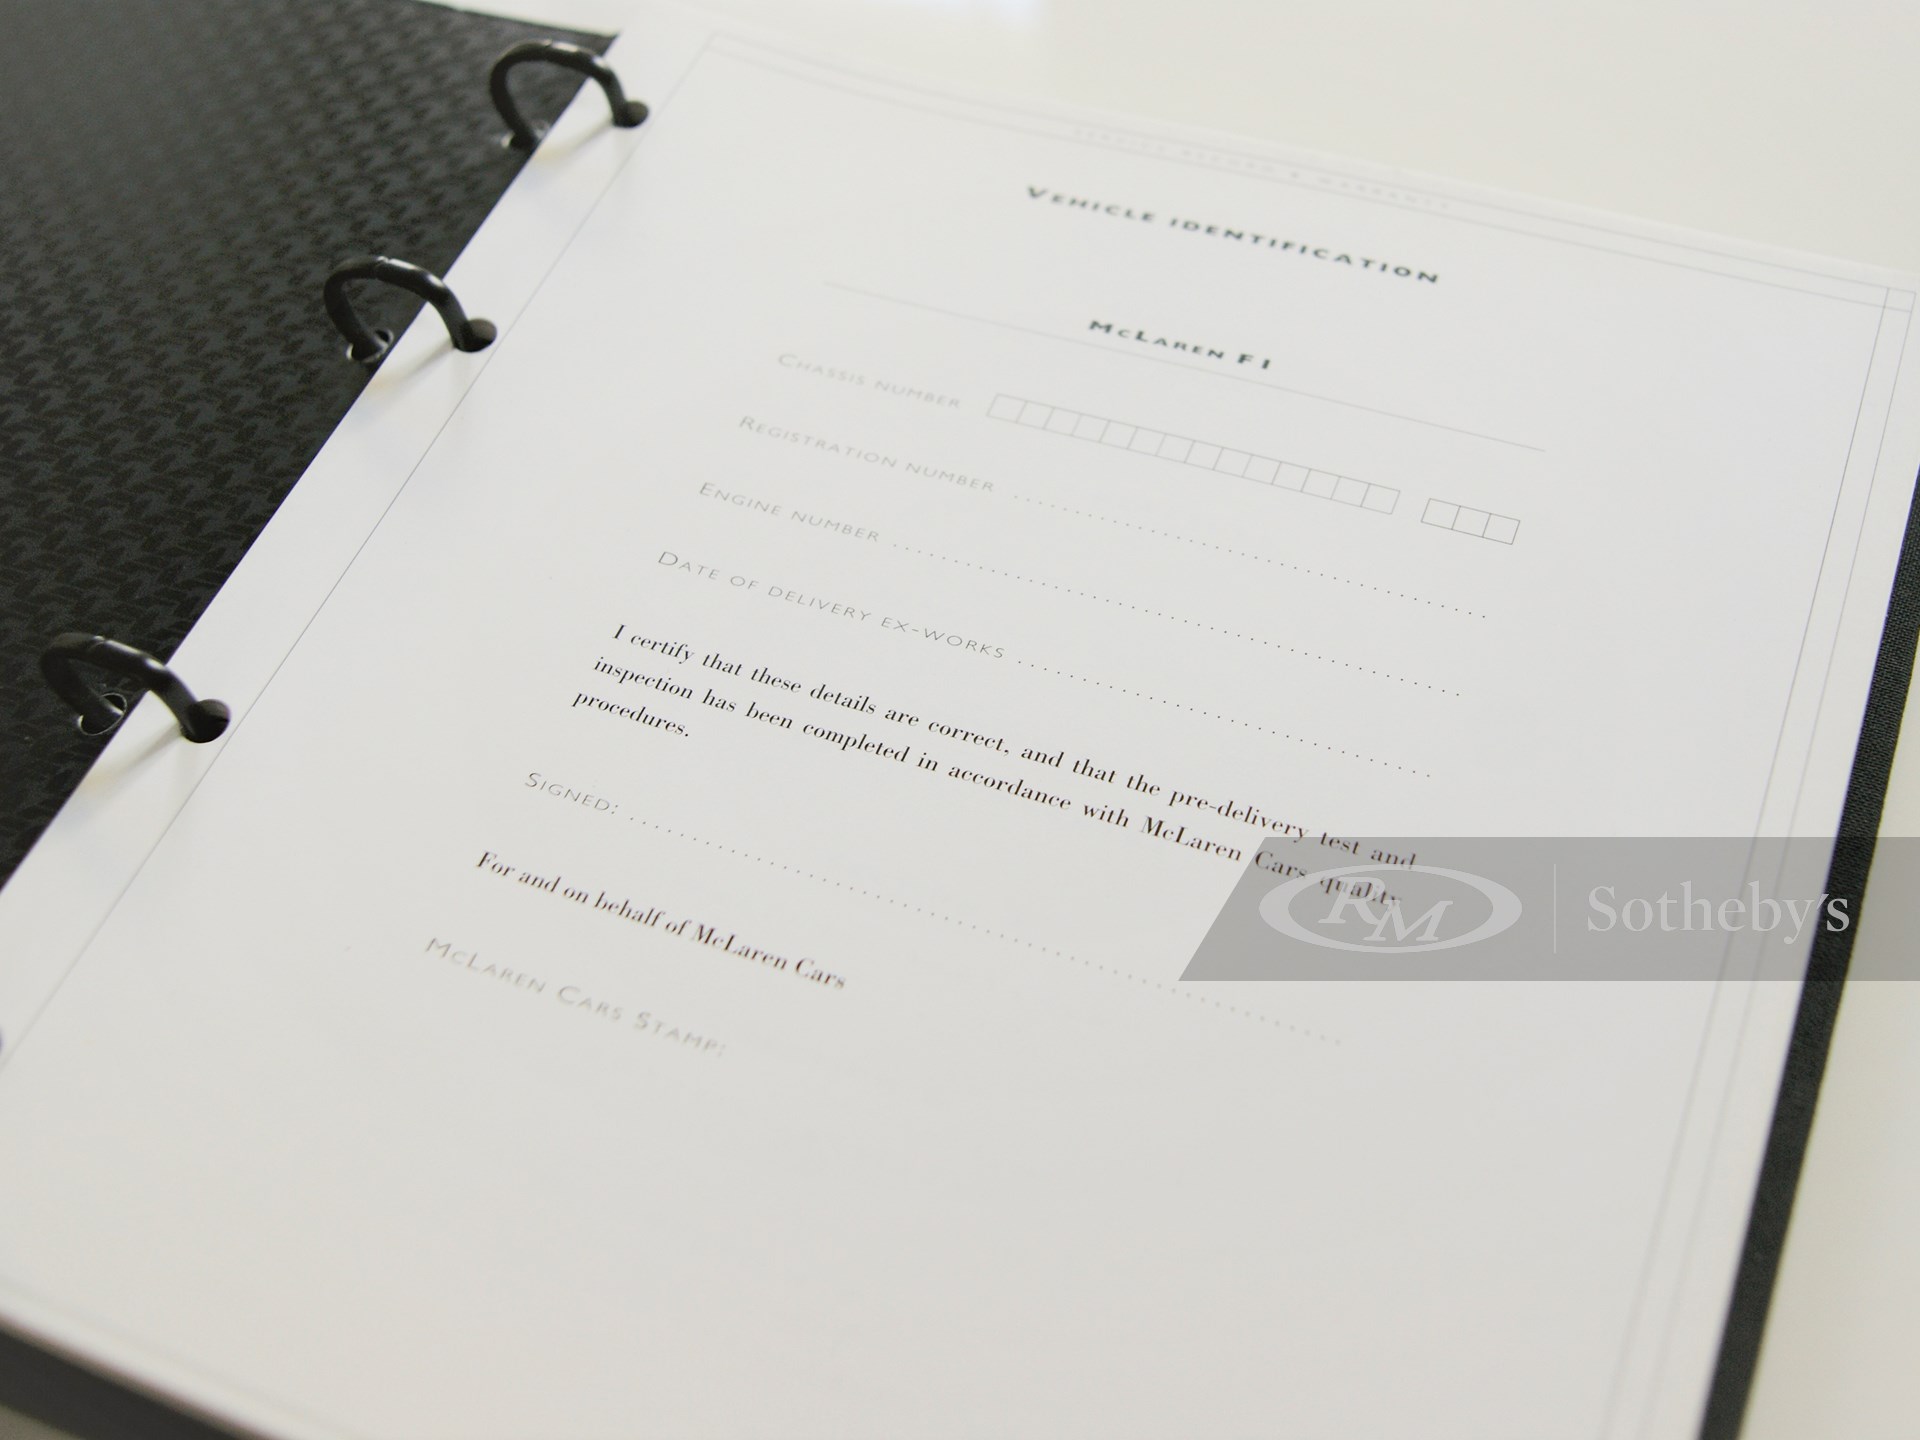 McLaren F1 Owners Manual and Service Record & Warranty Book | Open